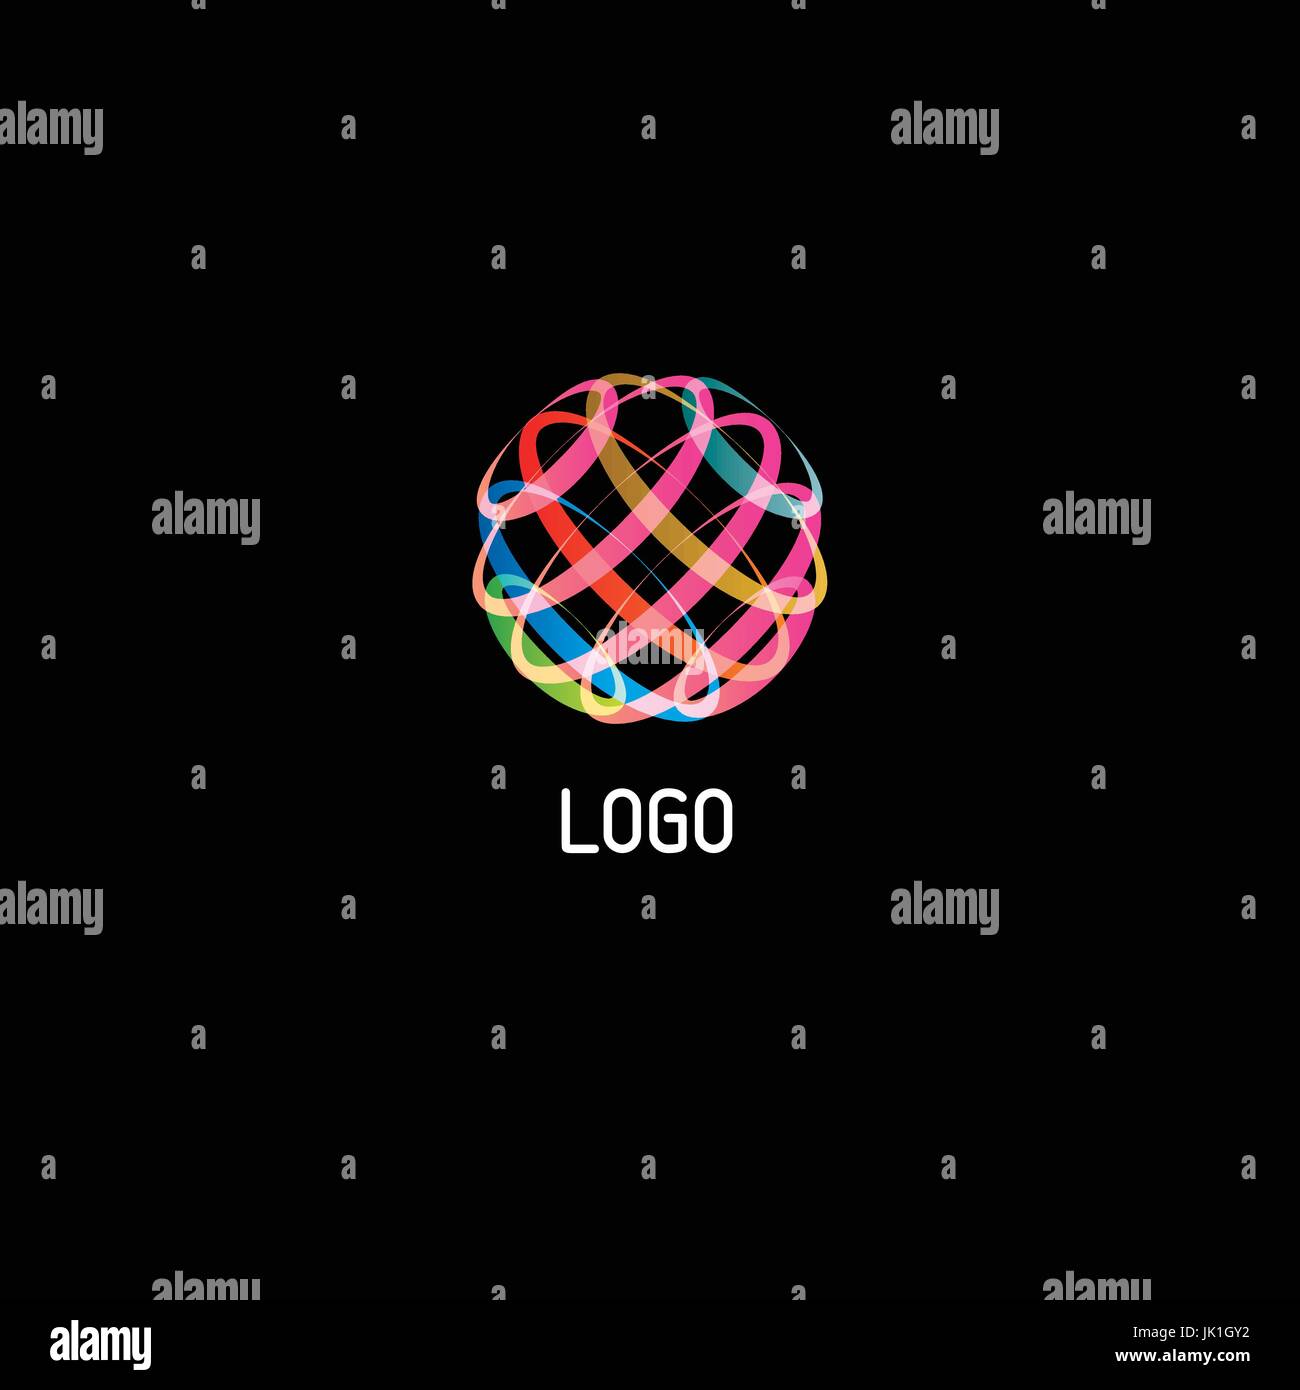 Colorful circle abstract line art vector logo on black background. Stock Vector